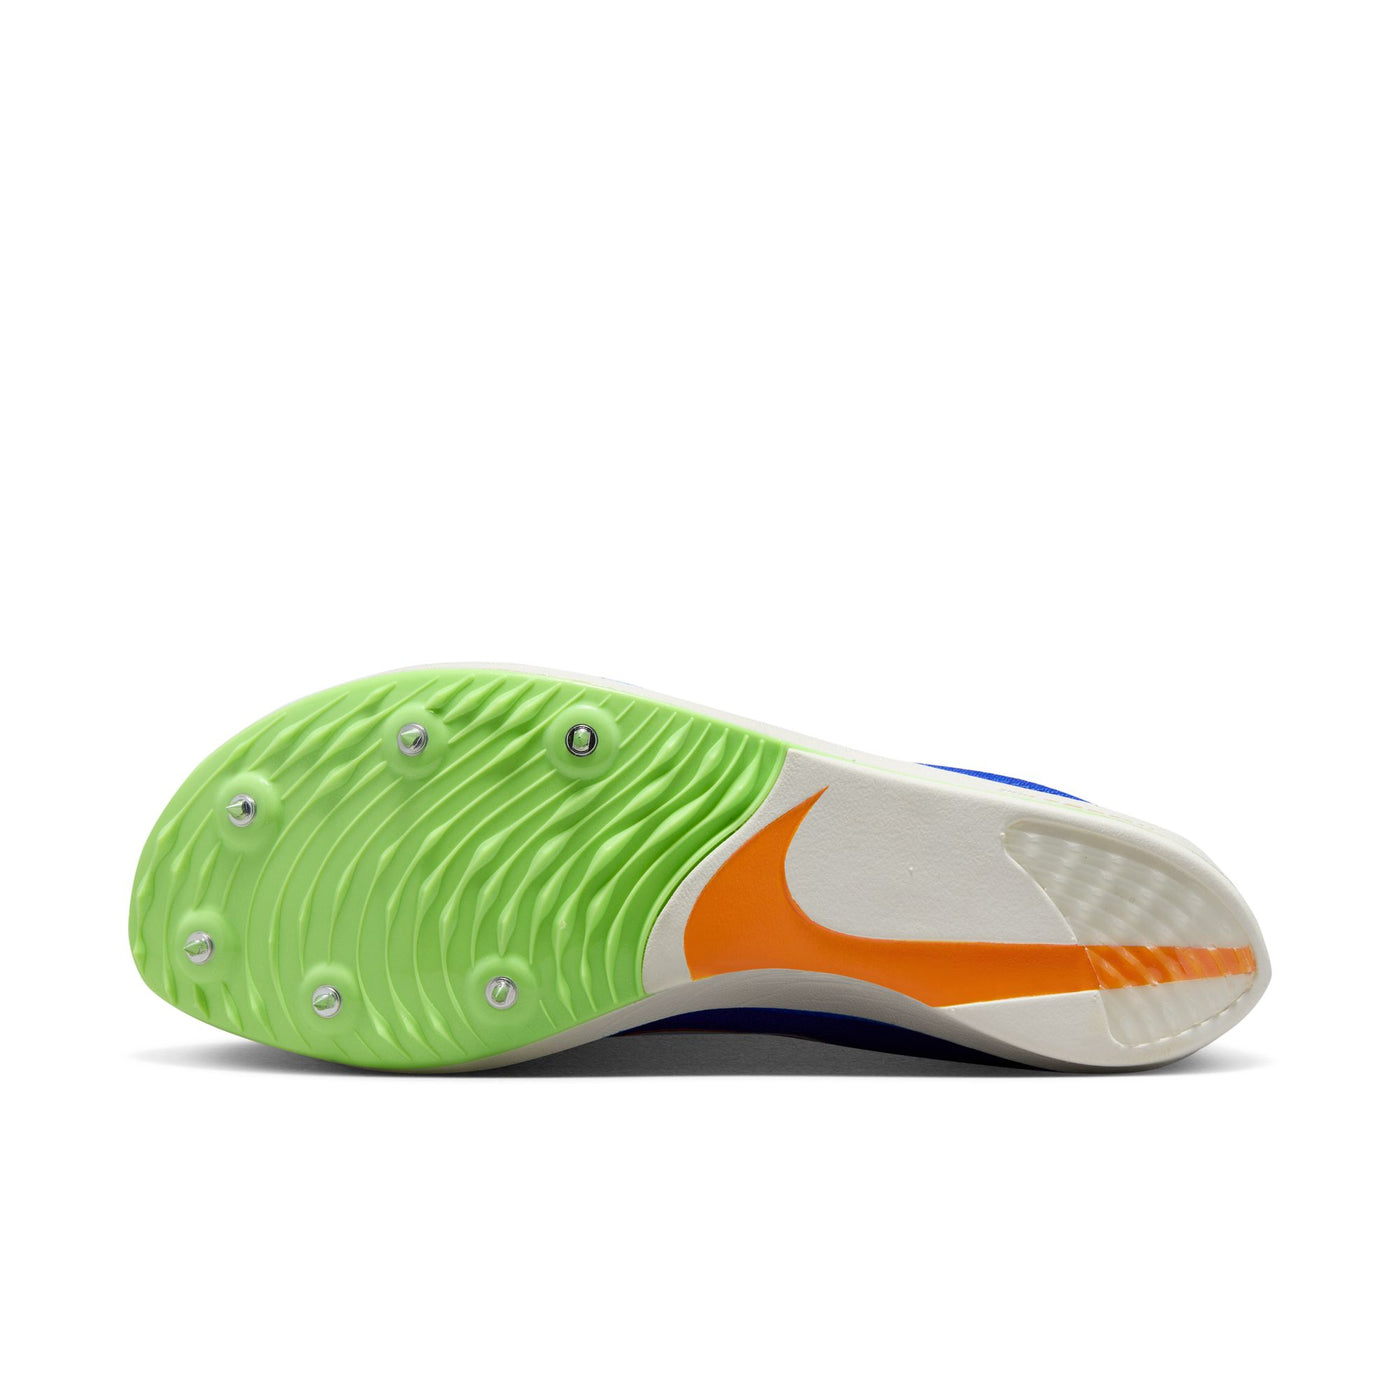 Unisex Nike ZoomX Dragonfly Distance Spike - CV0400-400